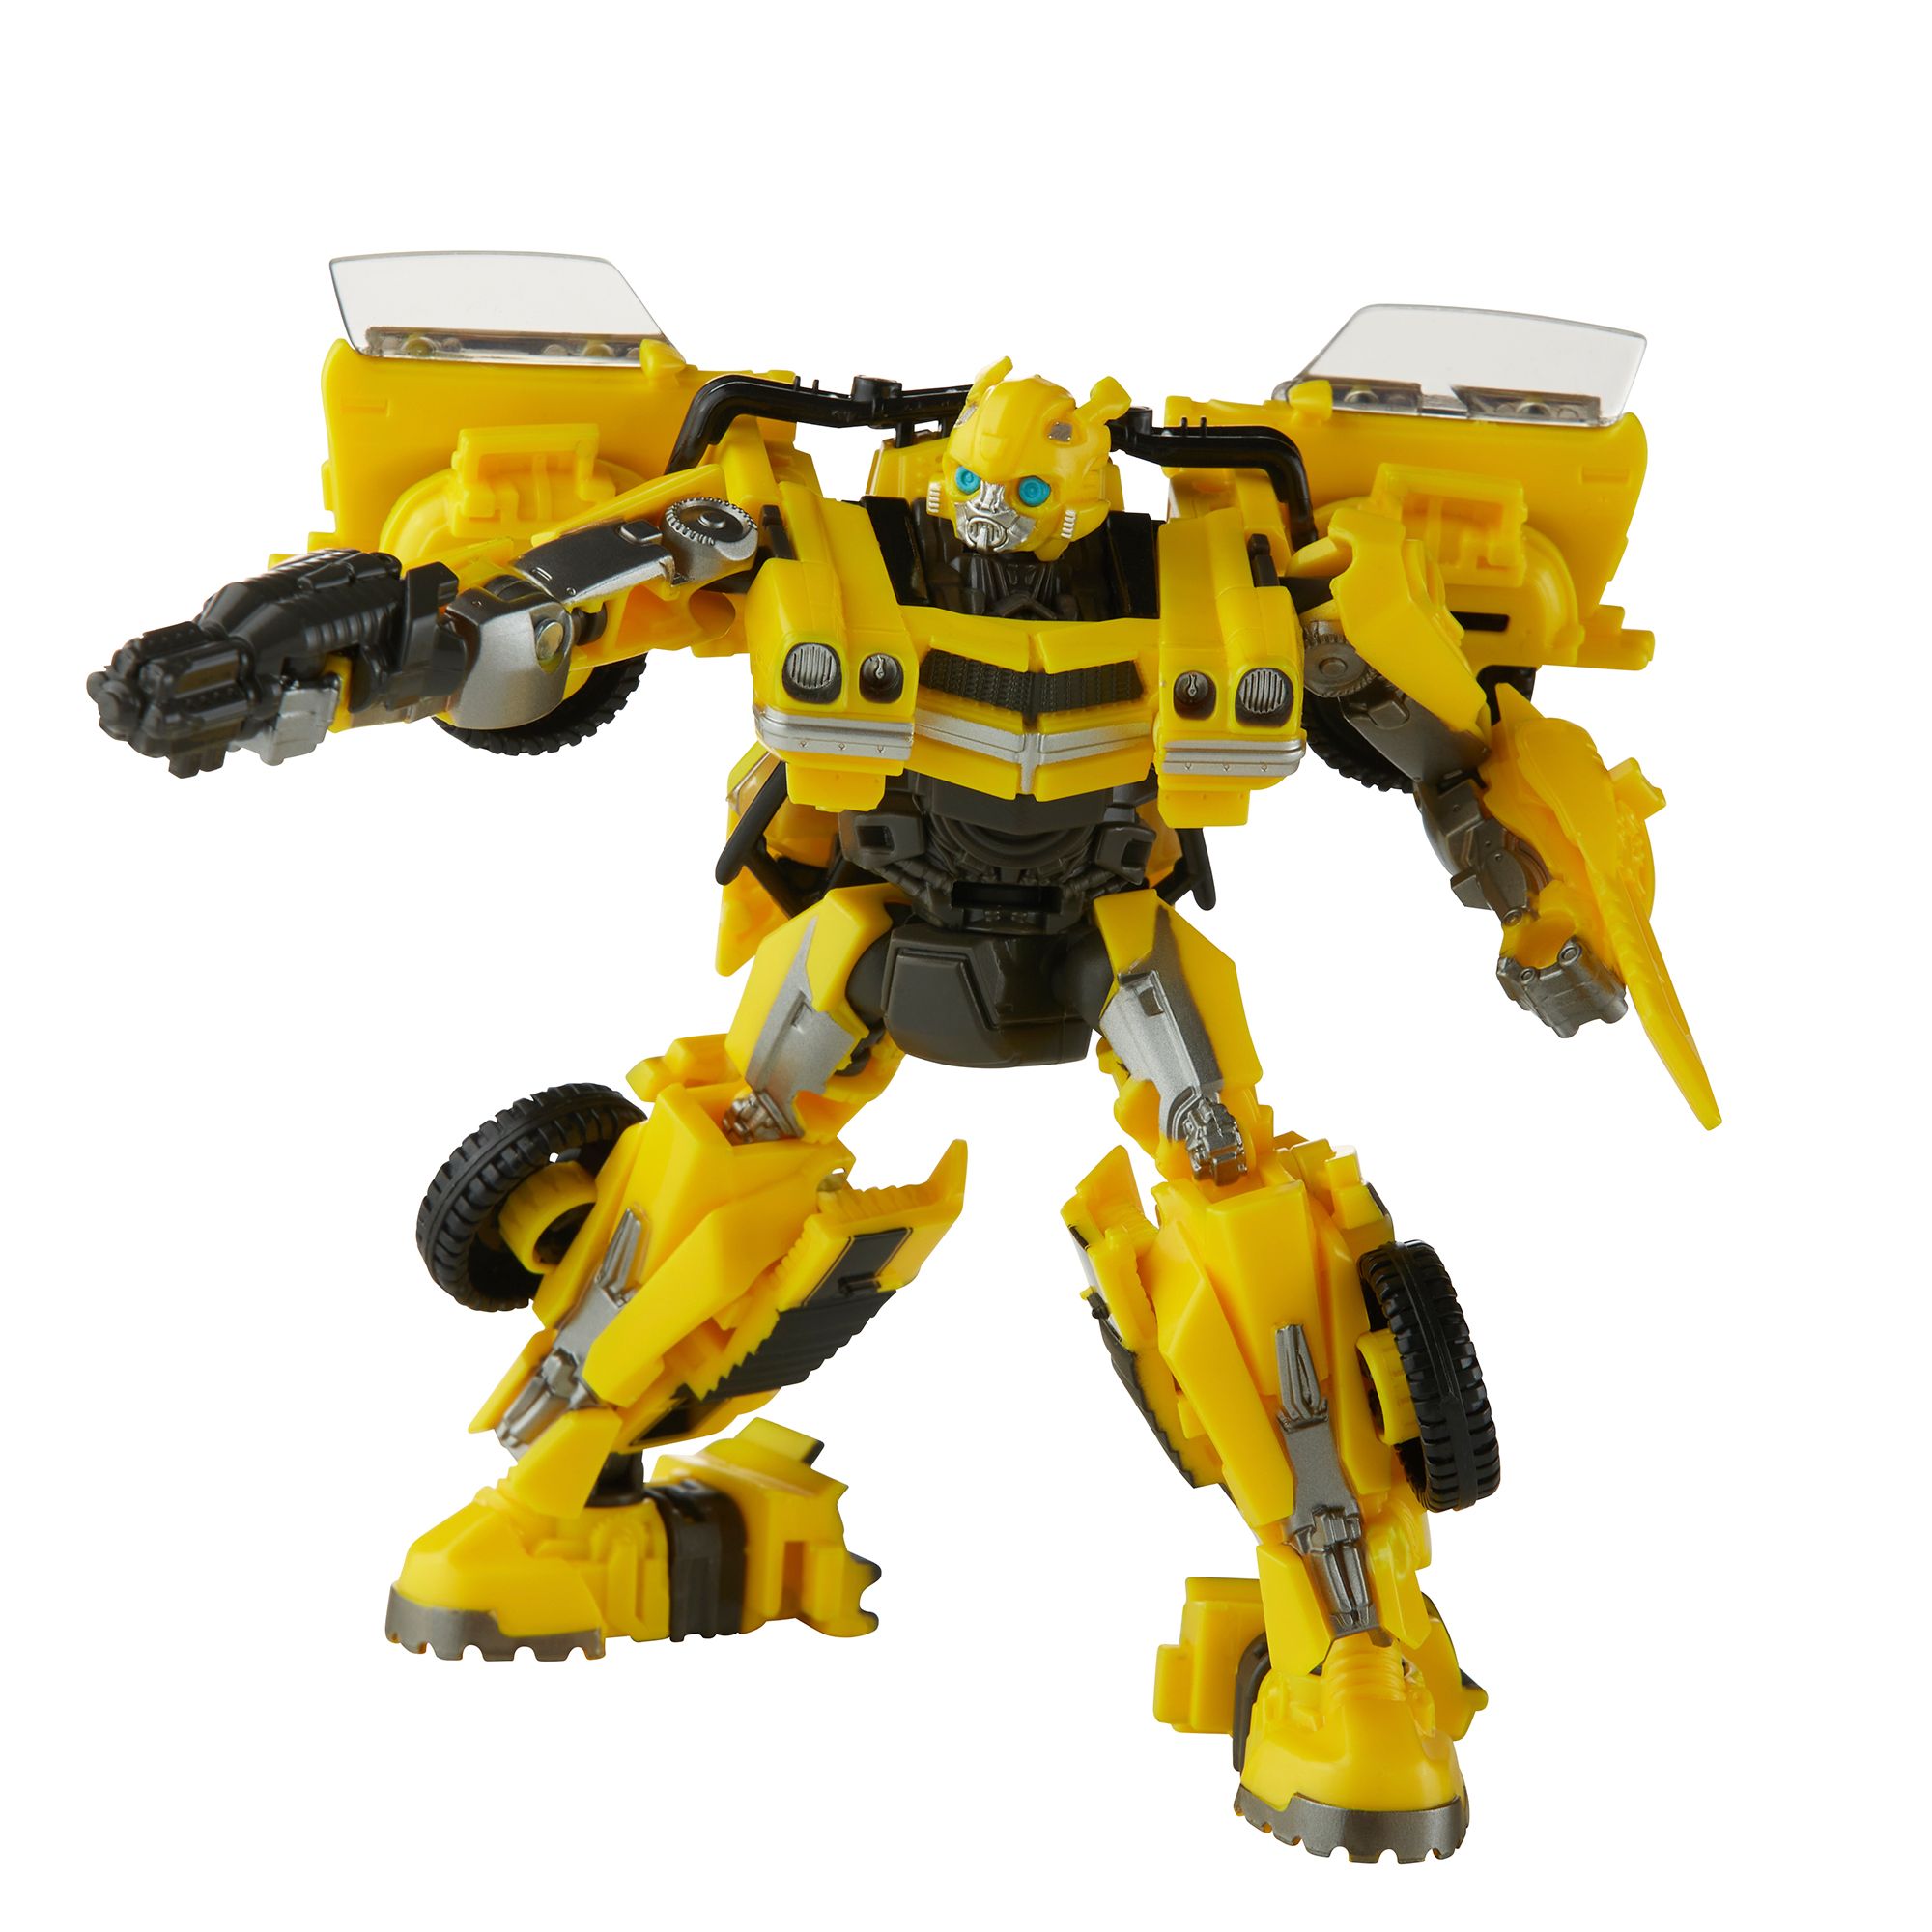 TRANSFORMERS Ultimate Bumblebee Nostalgic Toy Review